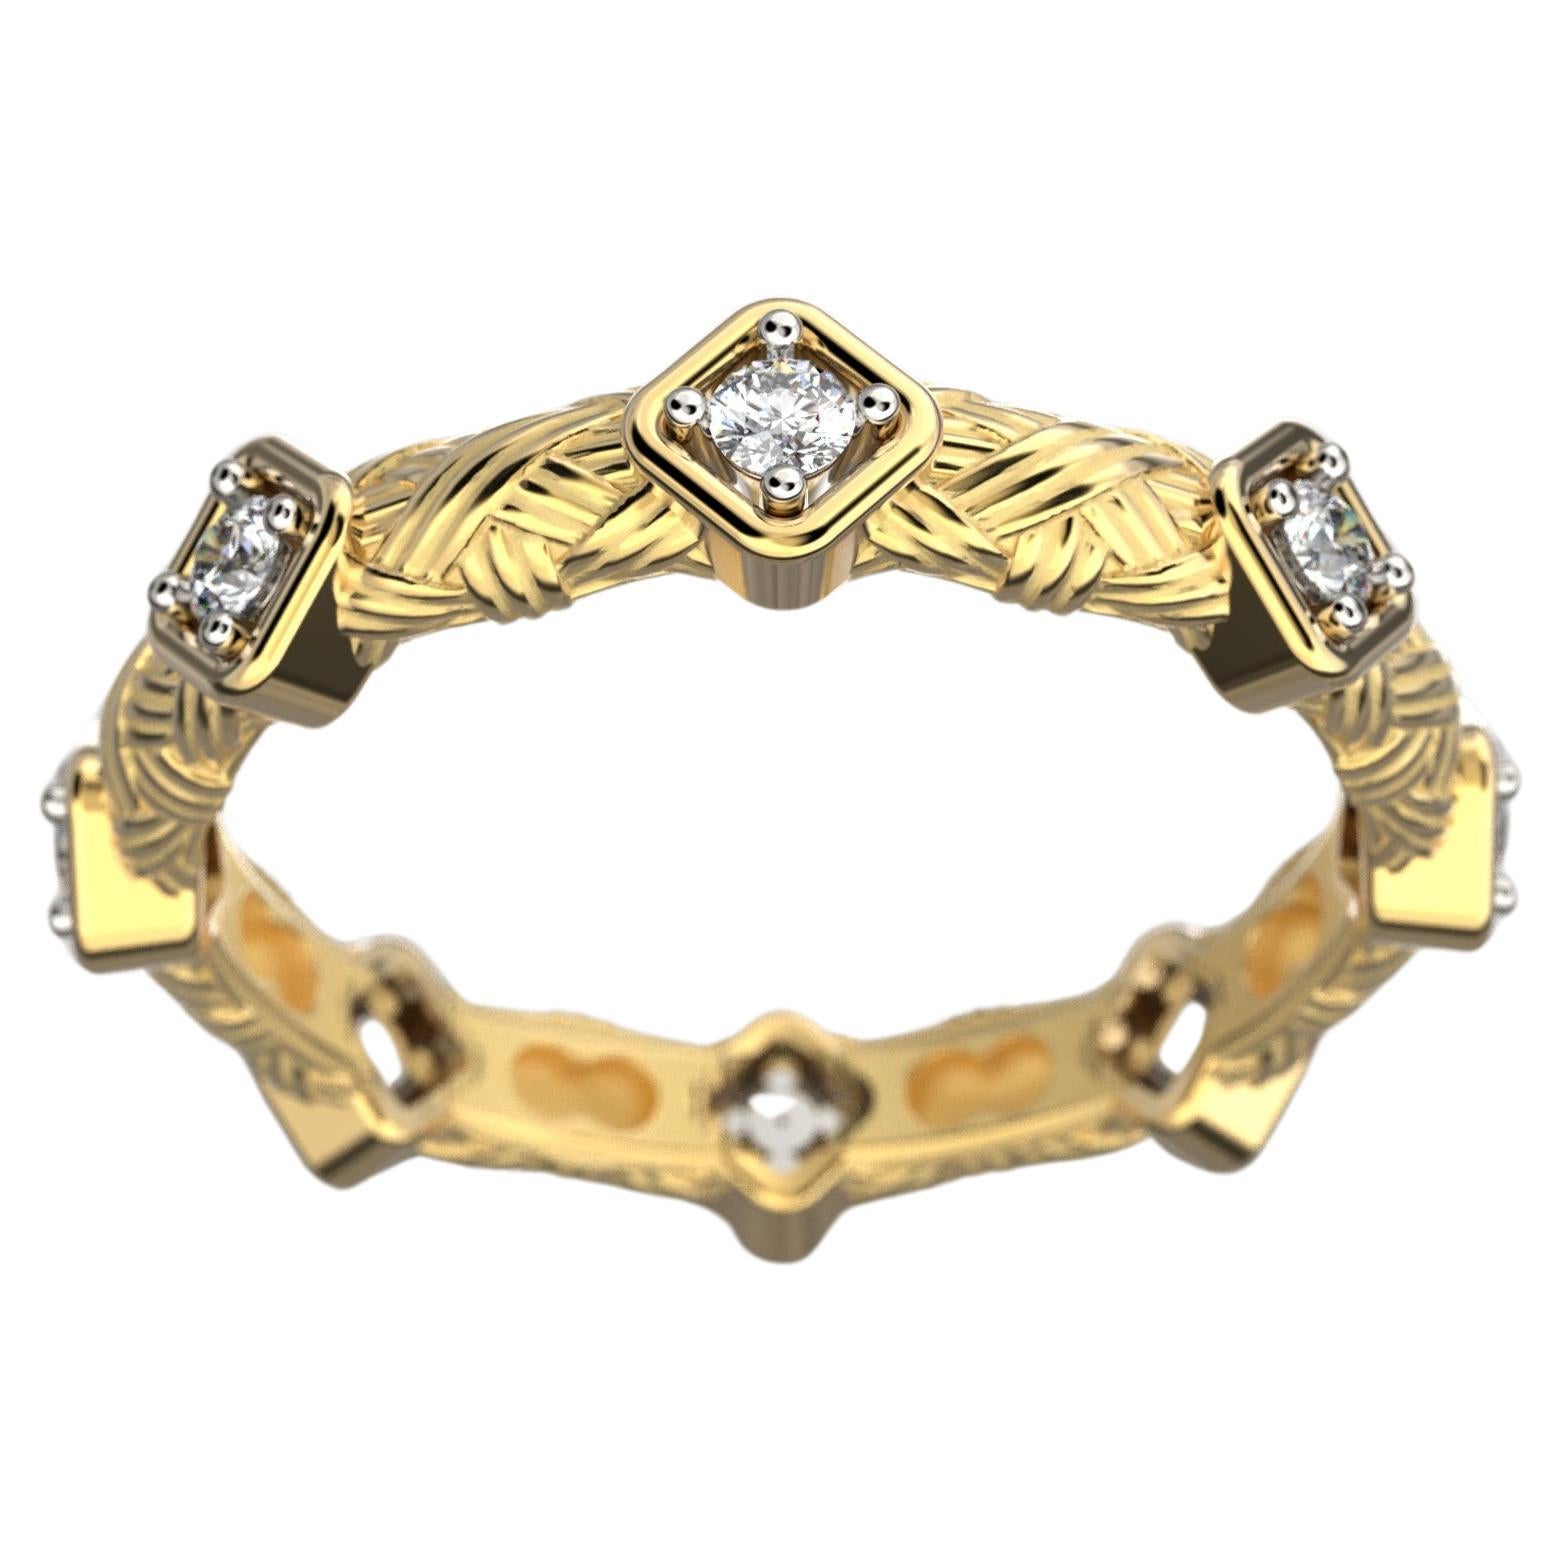 14k Gold Eight Diamond Band Ring  Made in Italy by Oltremare Gioielli